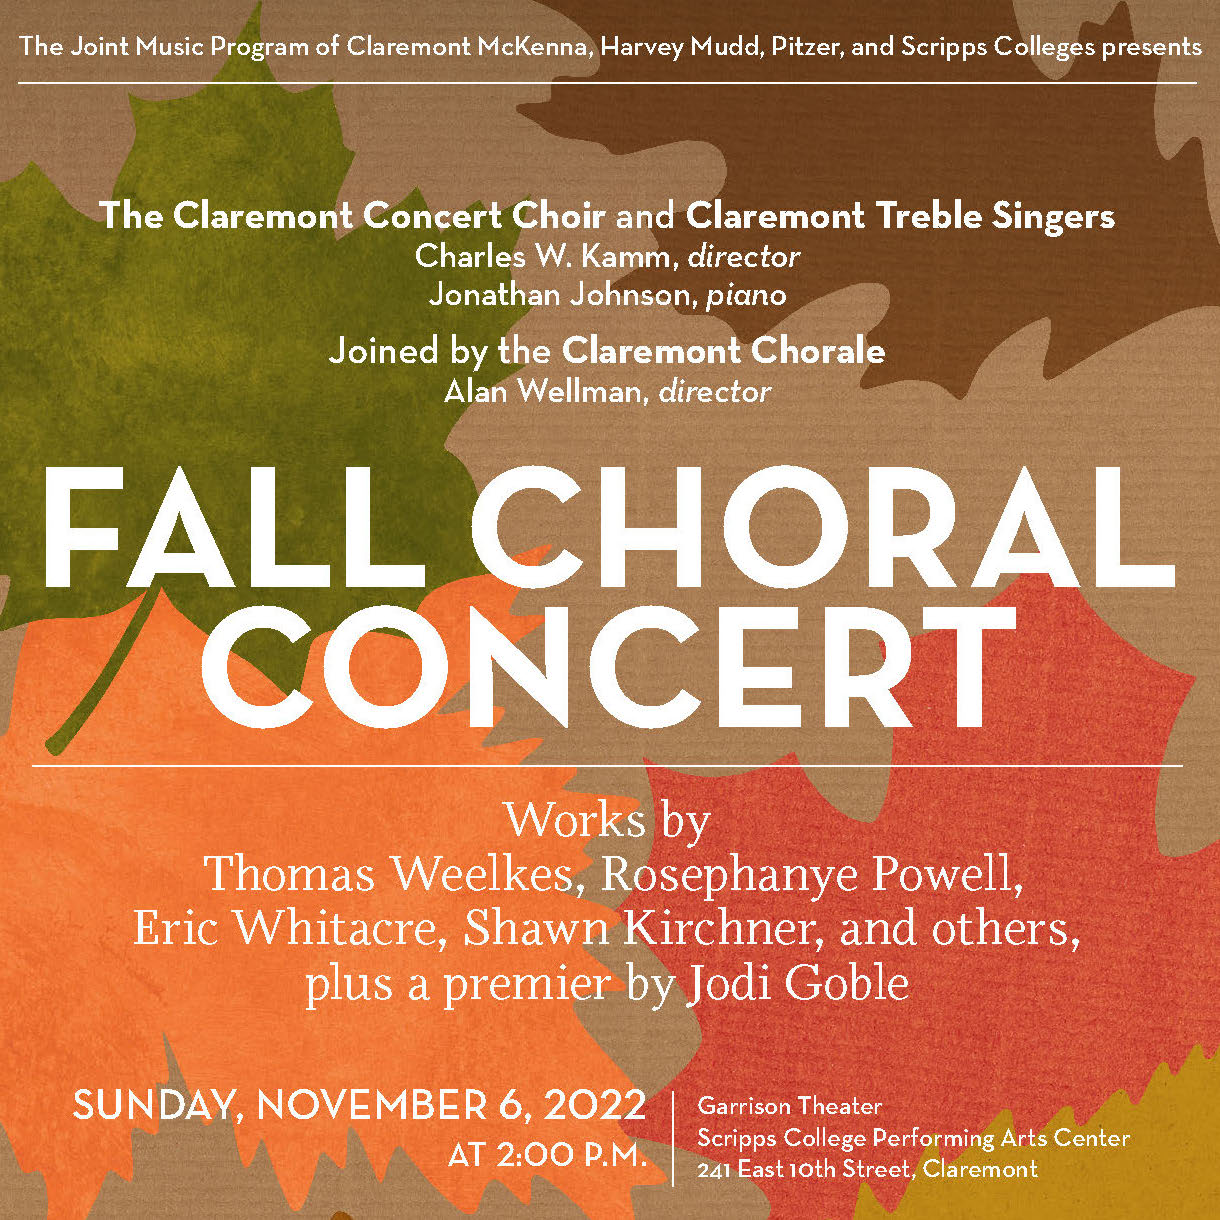 Fall Choral Concert Image